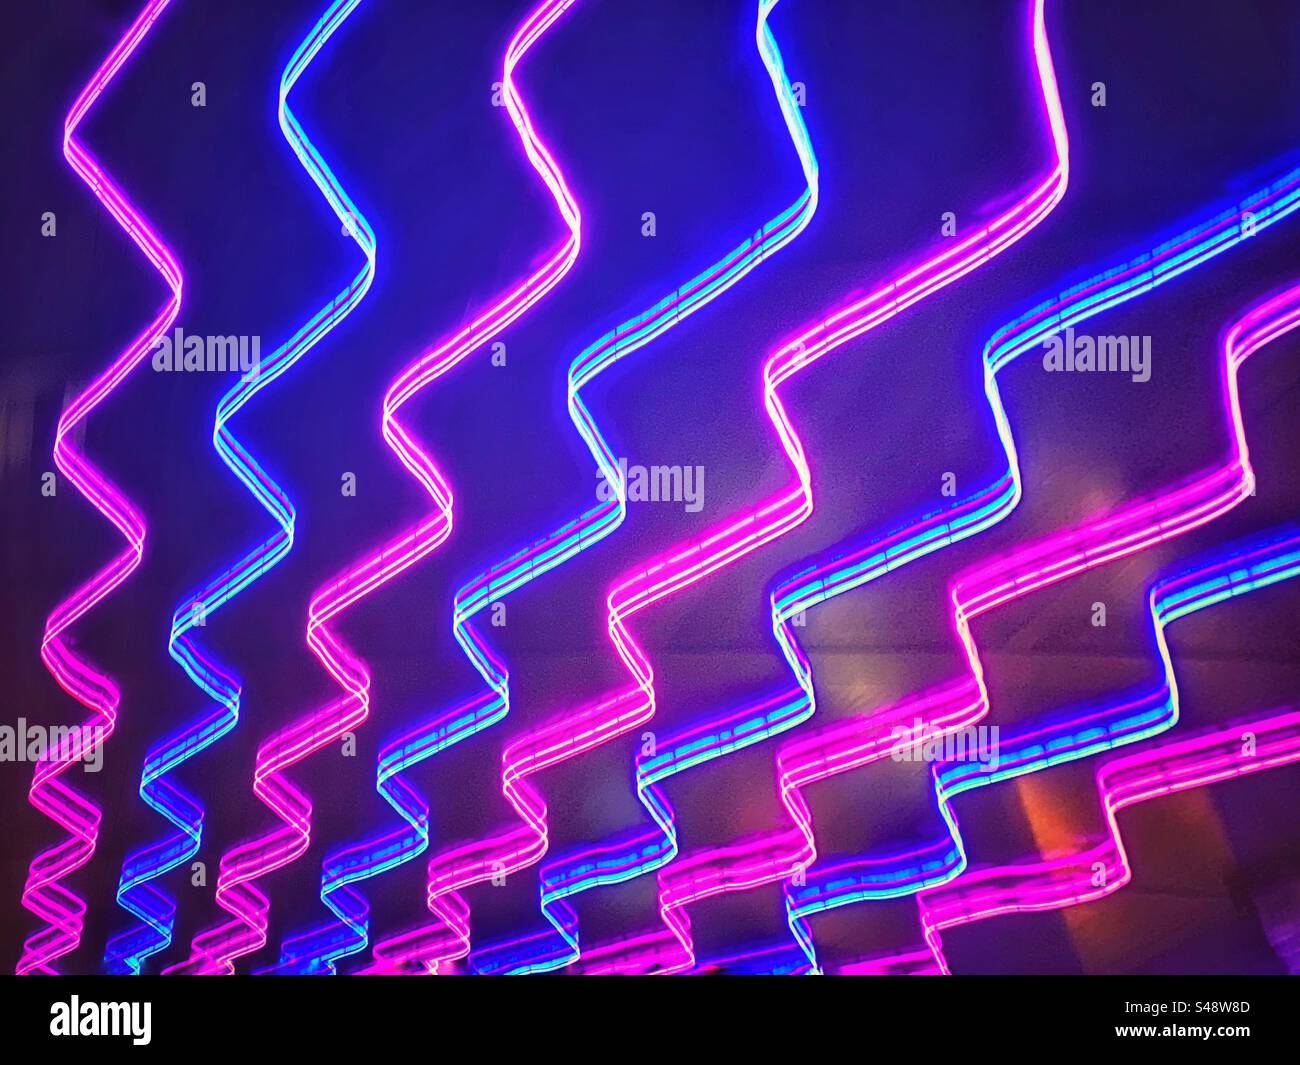 Neon pink and blue zigzag chevron pattern lights. Funky background texture Stock Photo